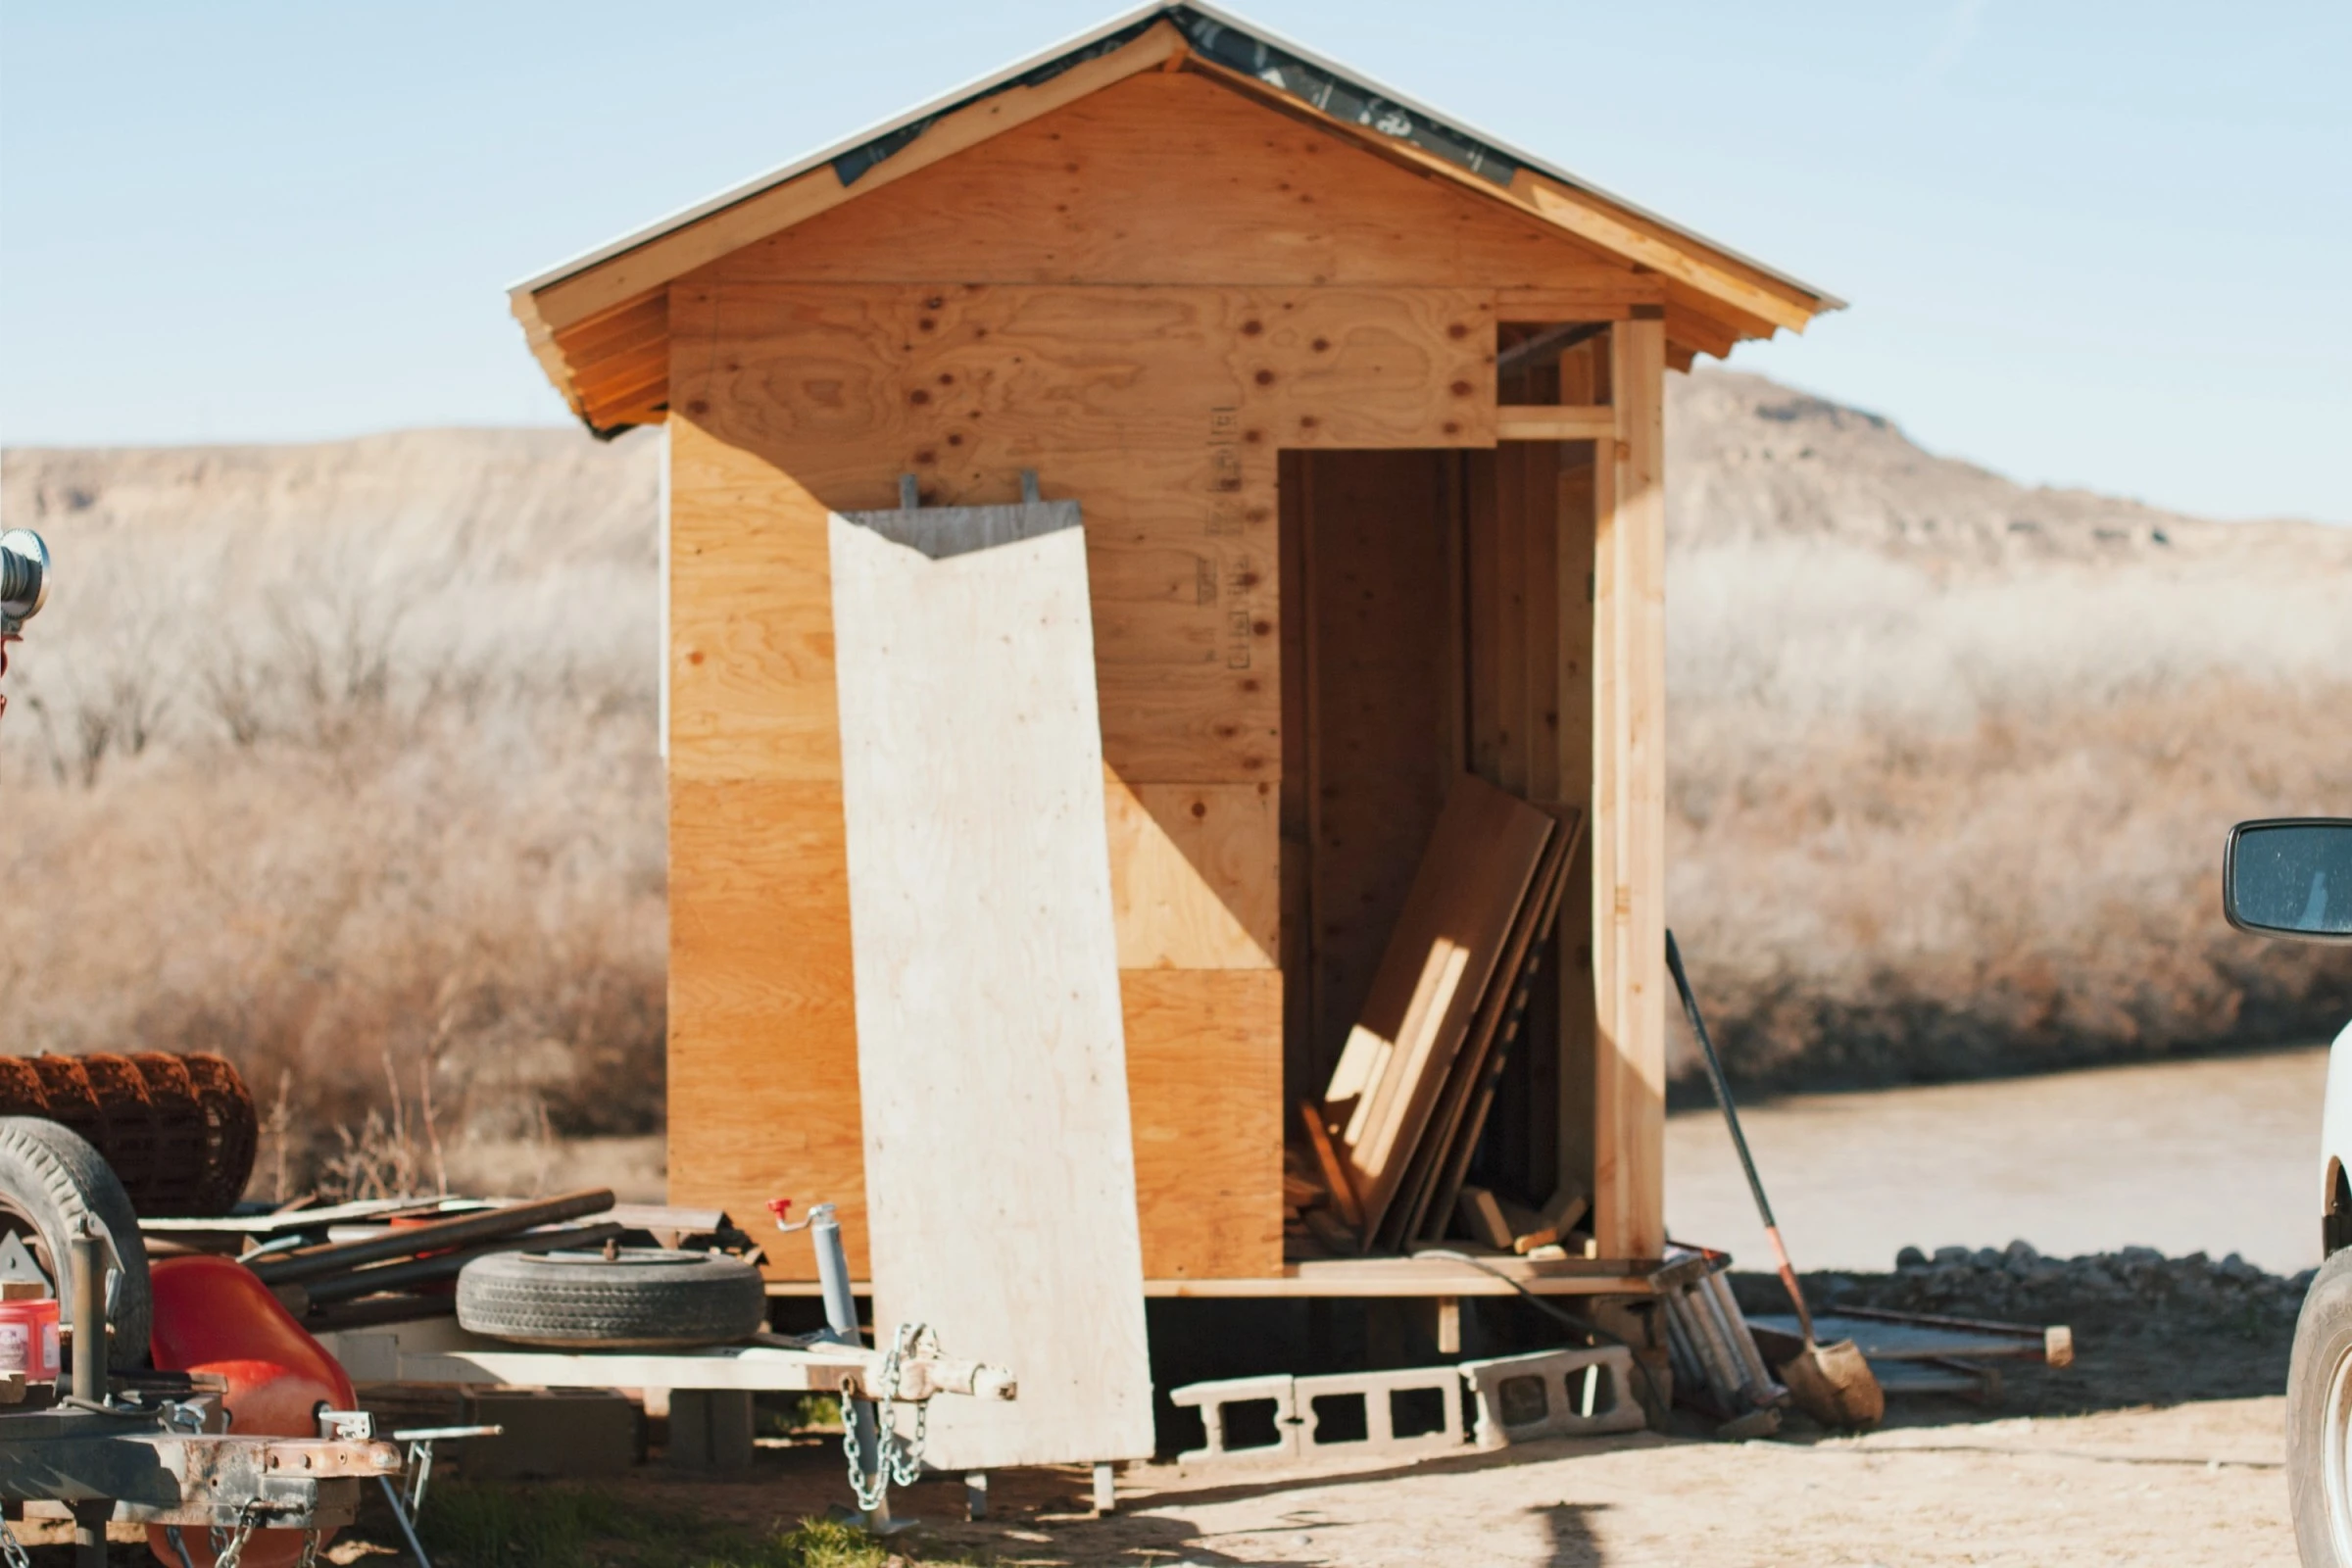 How to Move a Shed: A Handy Guide for Easy Shed Relocation